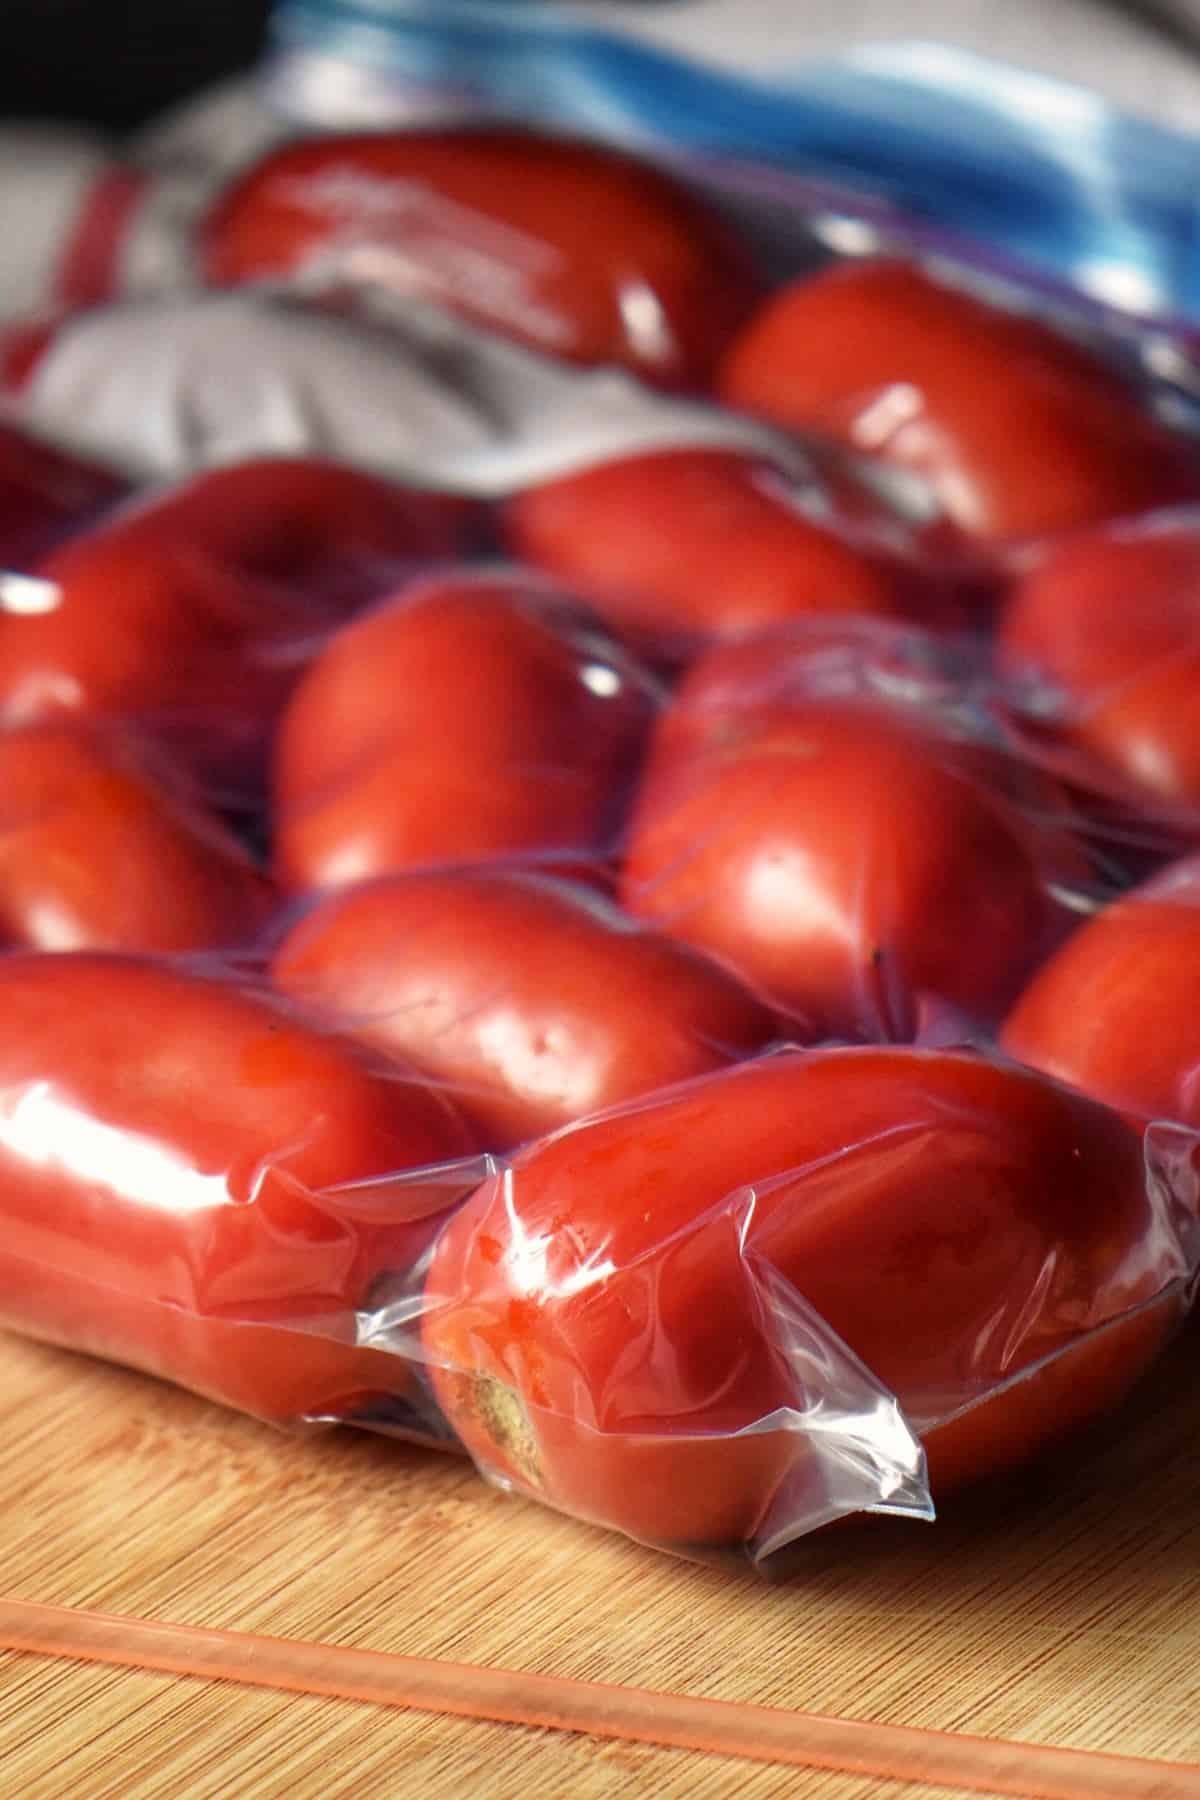 Packed tomatoes in a plastic zip lock bag, ready to go in the freezer. 